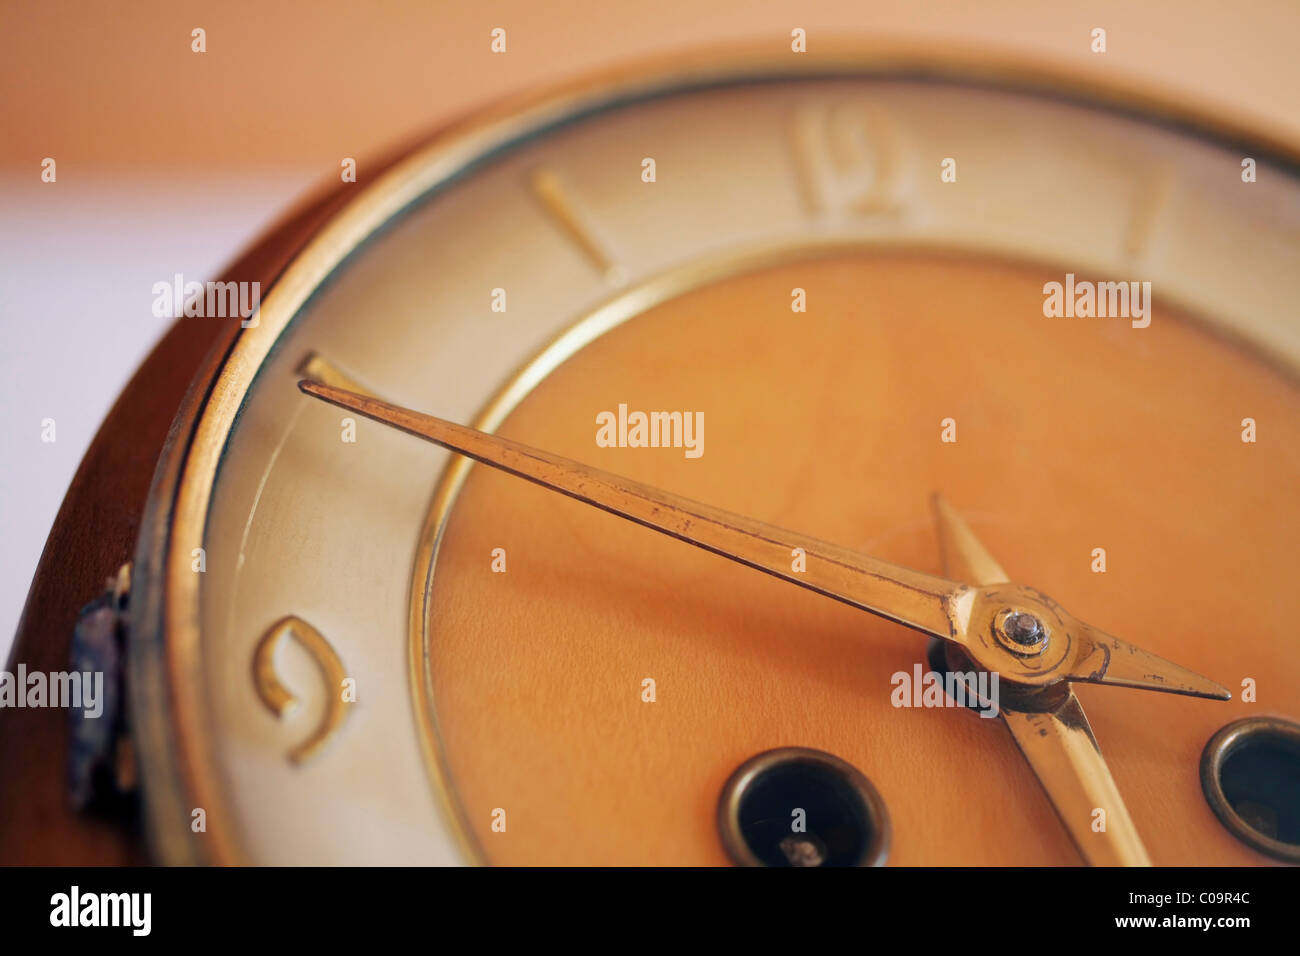 Old grandfather clock, detail Stock Photo